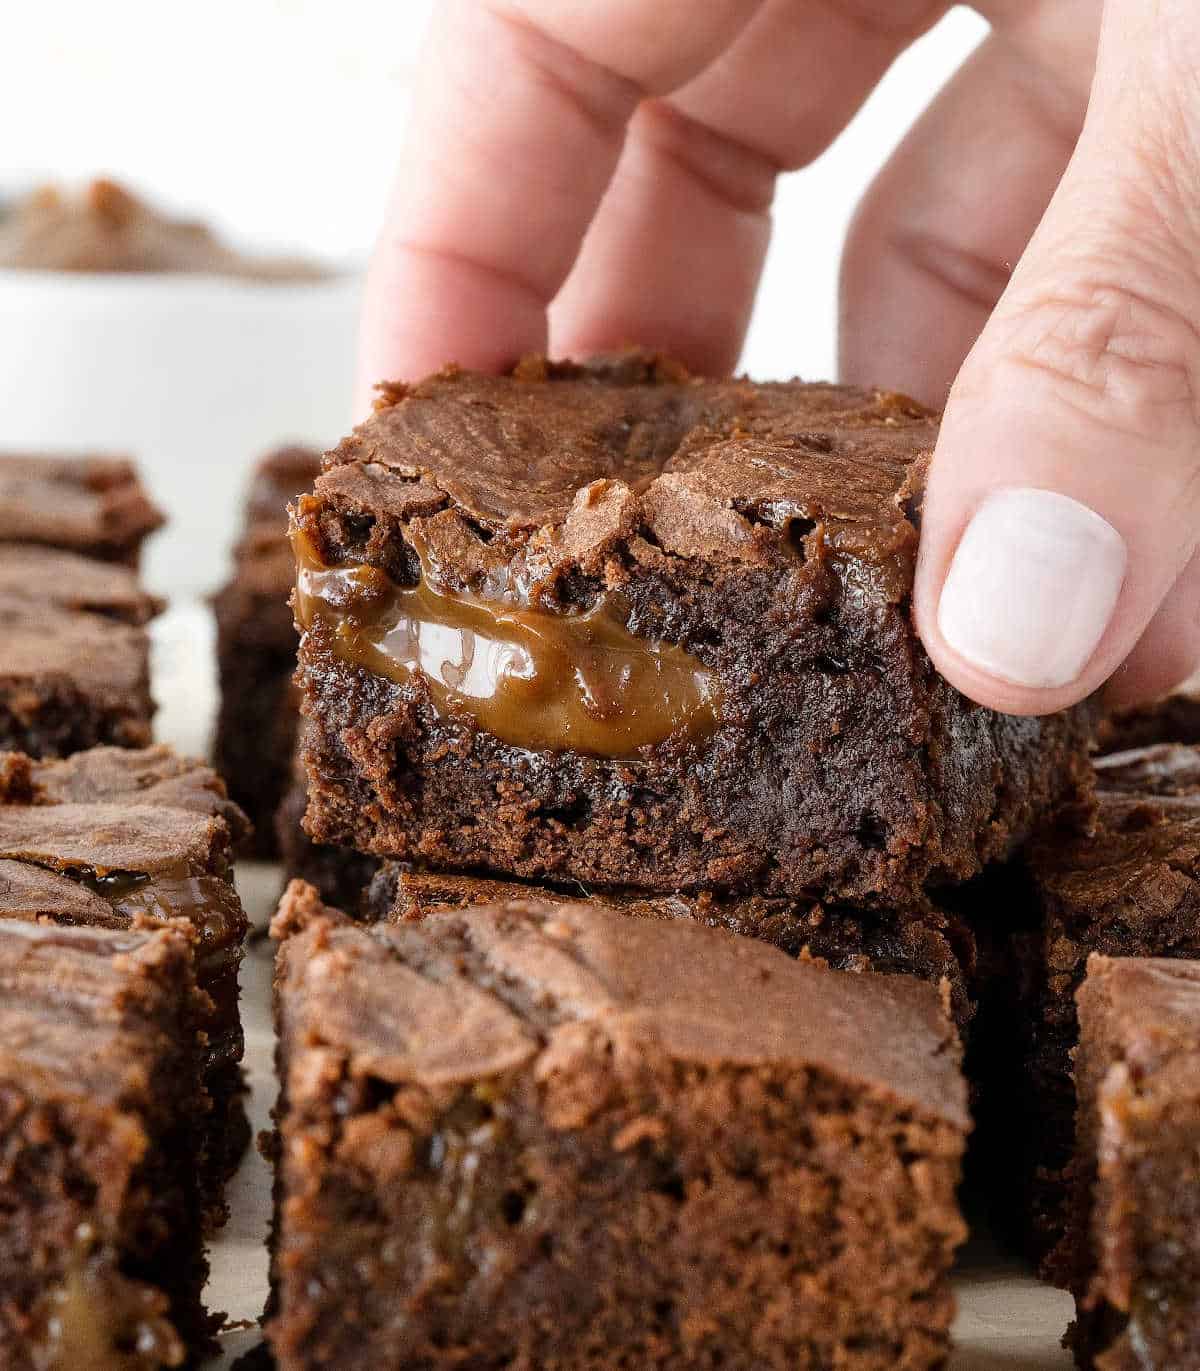 Hand grabbing a dulce de leche brownie from a stack.